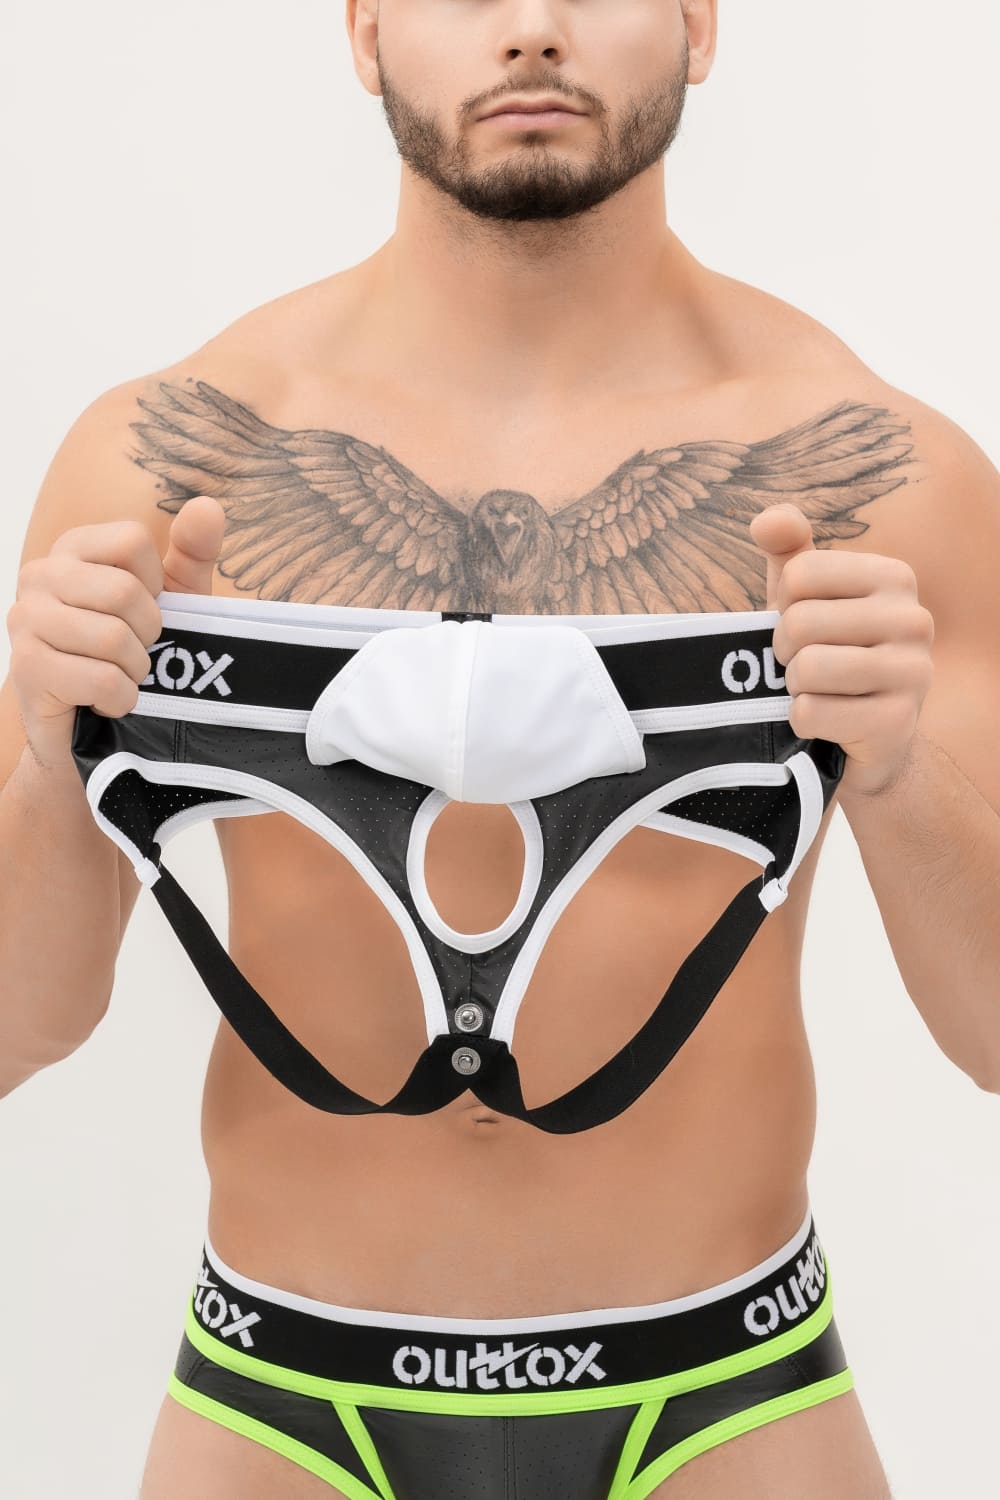 Outtox. Jock with Snap Codpiece. Black+White